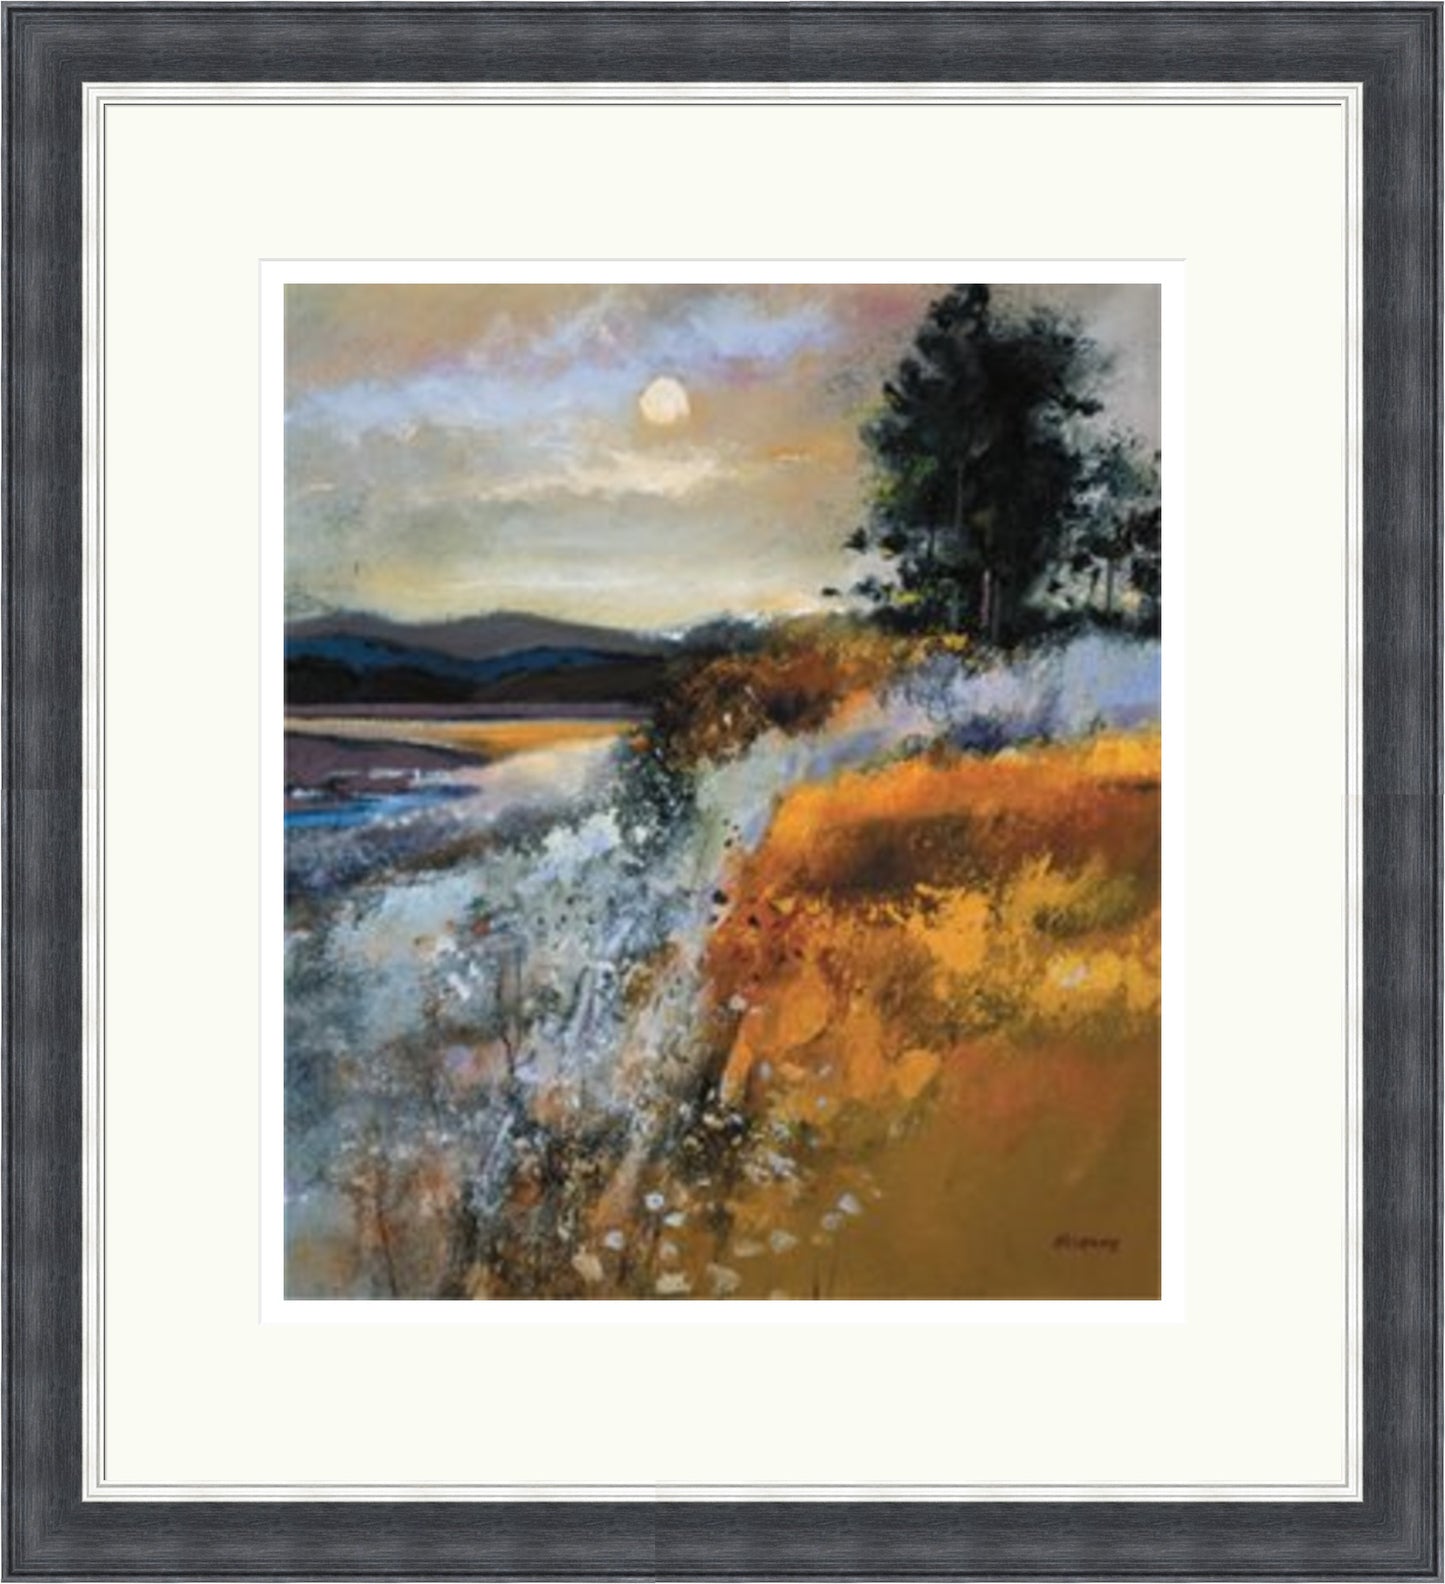 Last One - Estuary at Twilight (Signed Limited Edition) by Davy Brown